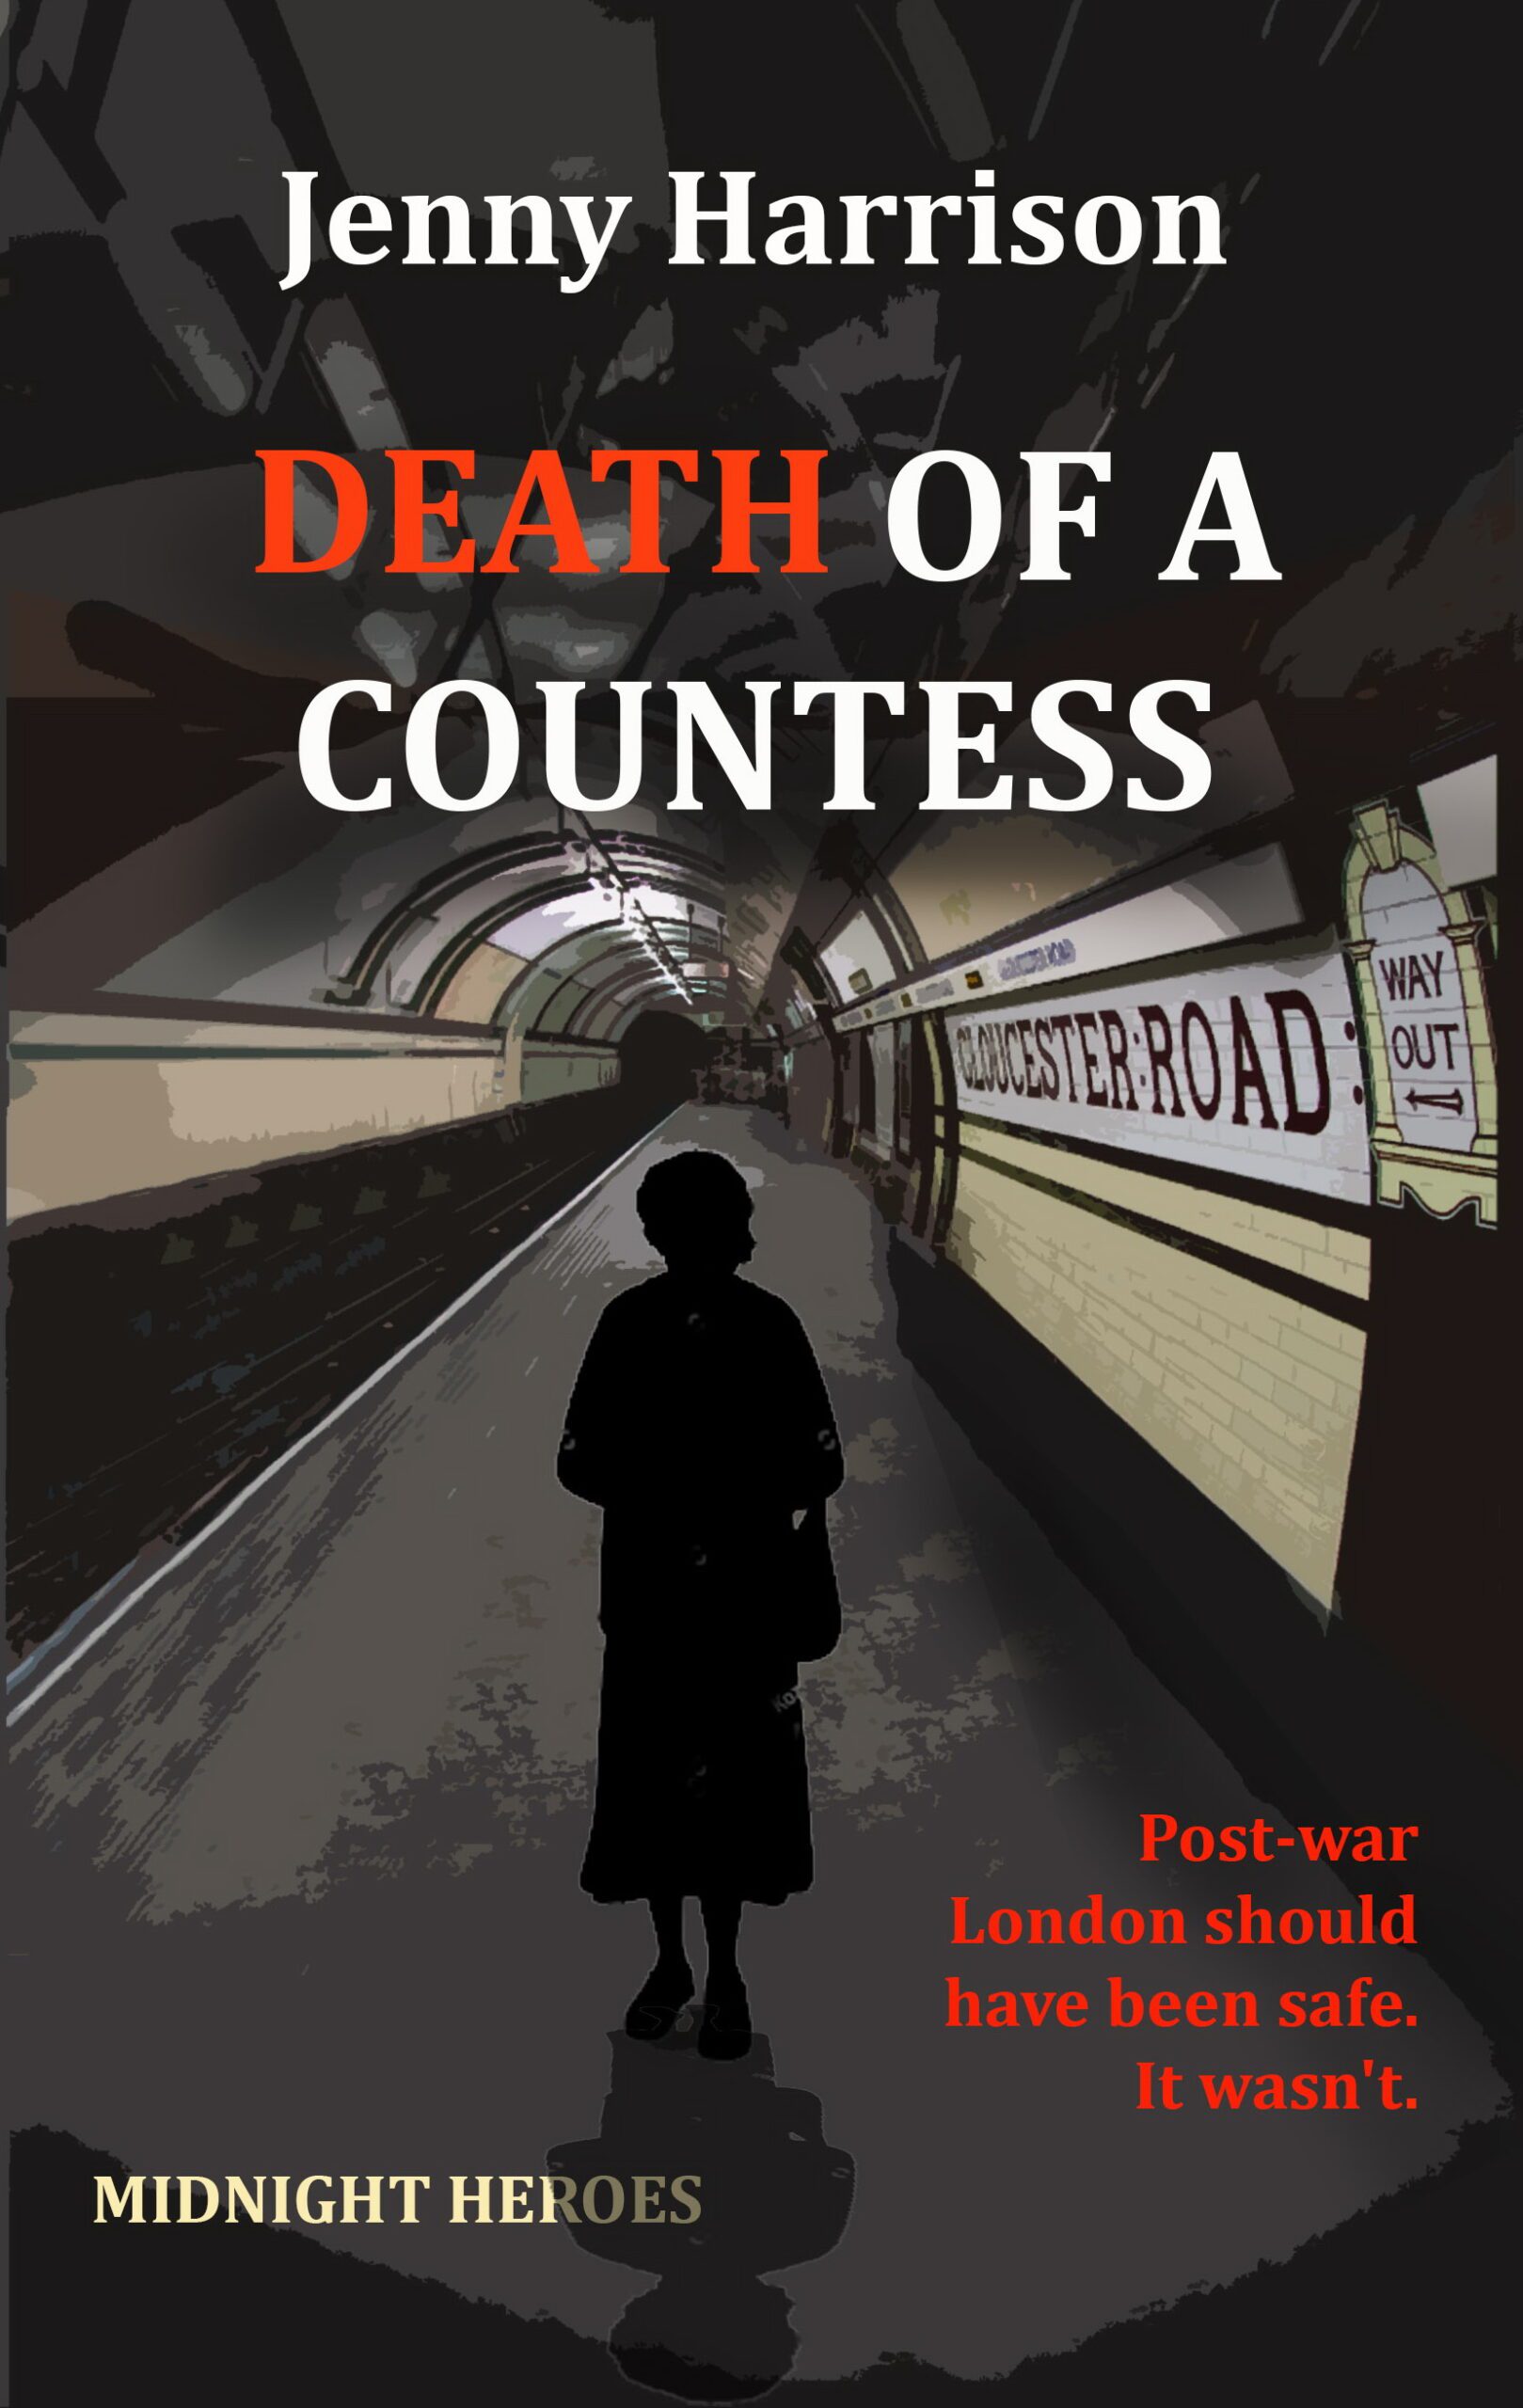 Death of a Countess by Jenny Harrison book cover